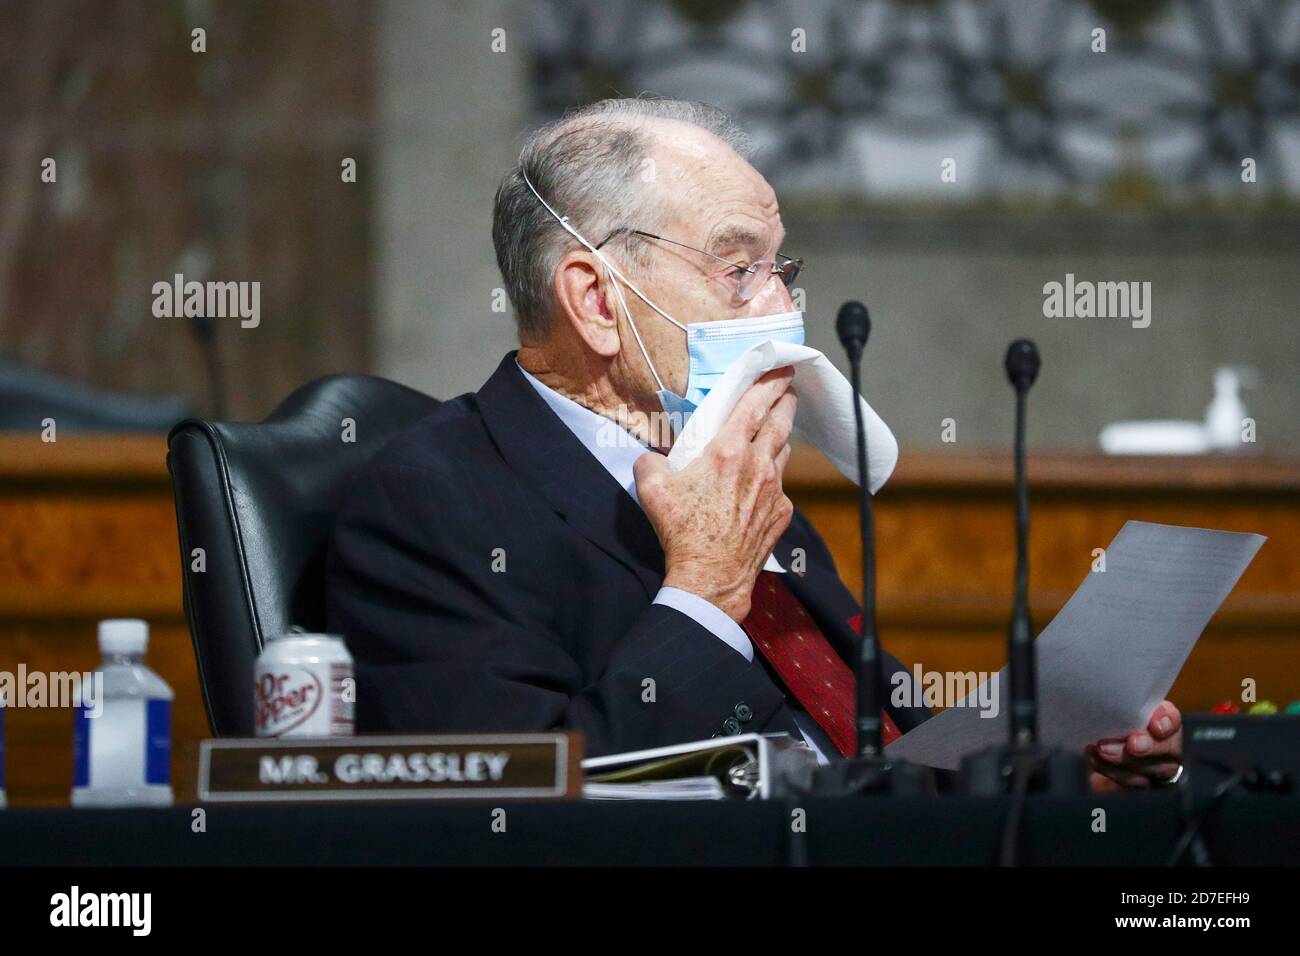 Washington, Dc, USA. 21st Oct, 2020. U.S. Senator Charles Grassley (R-IA) attends a Senate Judiciary Committee meeting on the nomination of Judge Amy Coney Barrett to be an associate justice of the U.S. Supreme Court, on Capitol Hill in Washington, U.S., October 22, 2020. (Photo by Hannah McKay/Pool/Sipa USA) Credit: Sipa USA/Alamy Live News Stock Photo